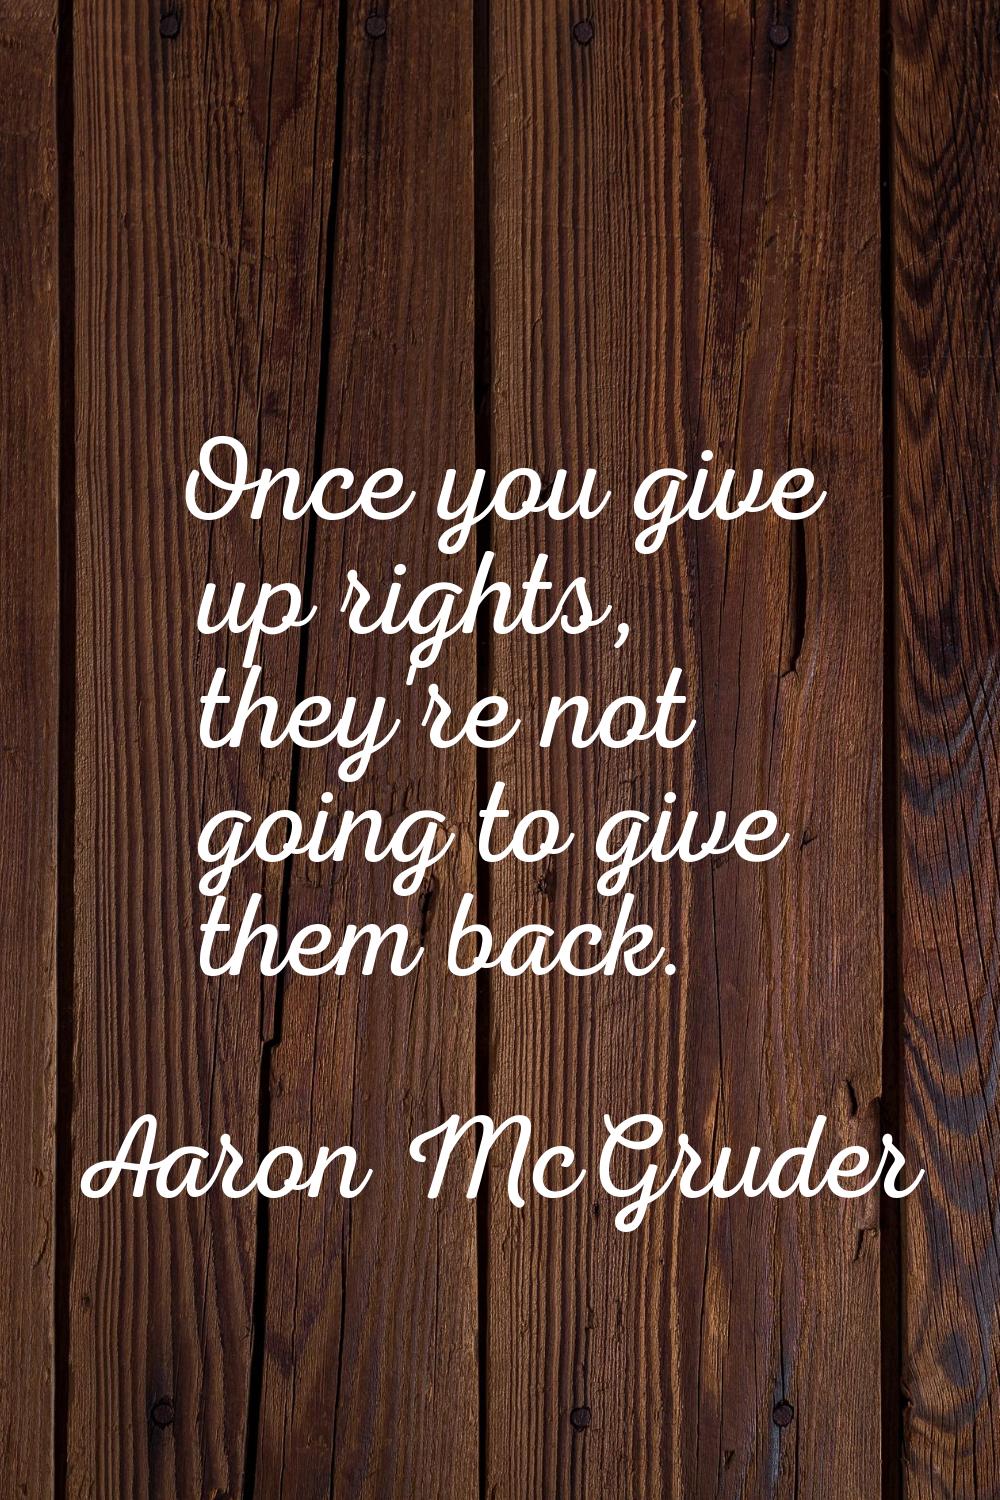 Once you give up rights, they're not going to give them back.